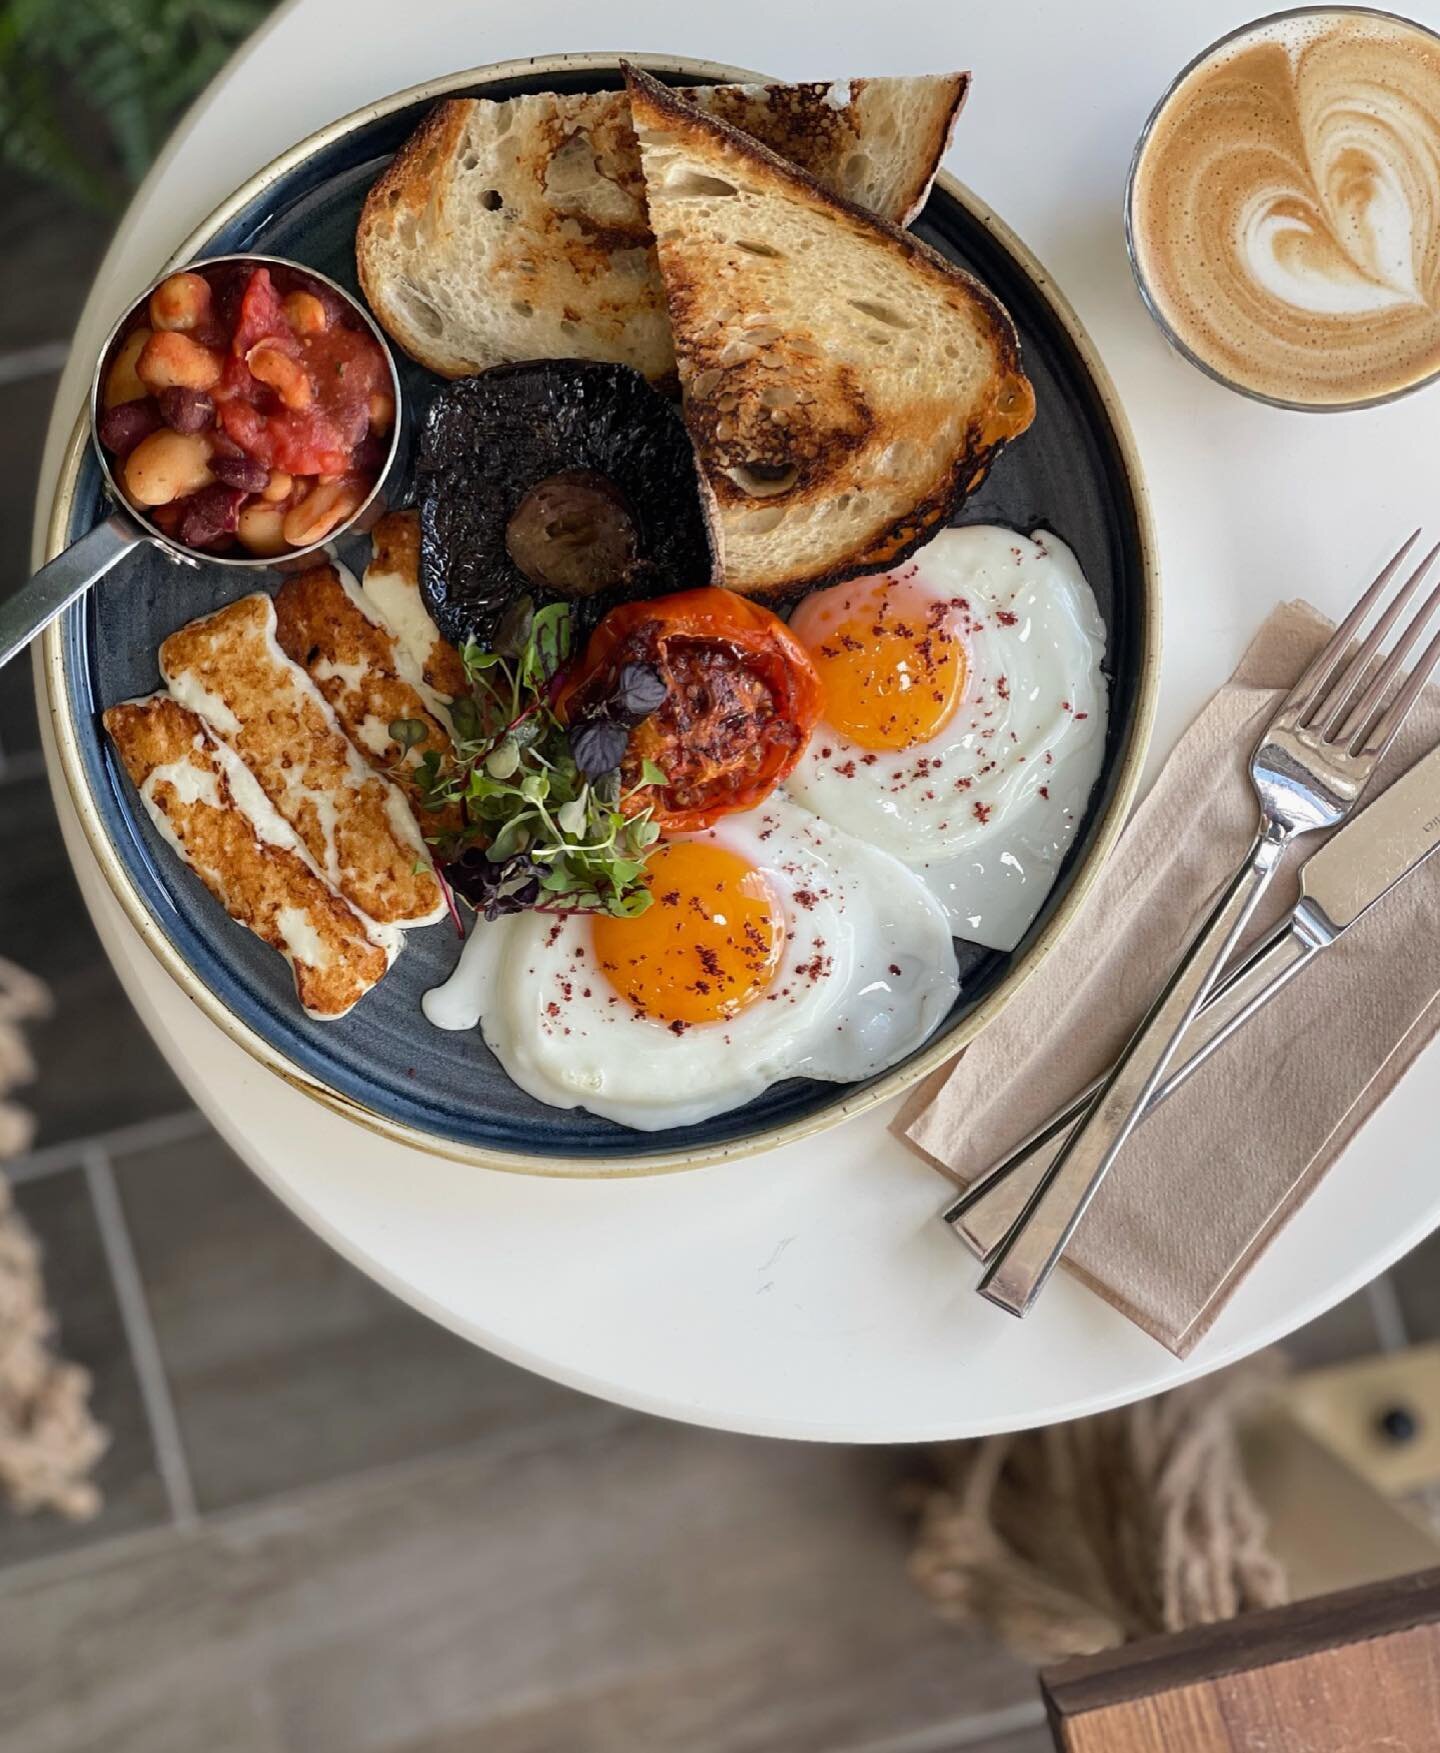 🍳 We&rsquo;re starting our day on the right foot with a wholesome W breakfast plate. Perfect to calm our football-fever nerves - it&rsquo;s coming home!

#woodlandcafelondon #itscominghome #comeonengland